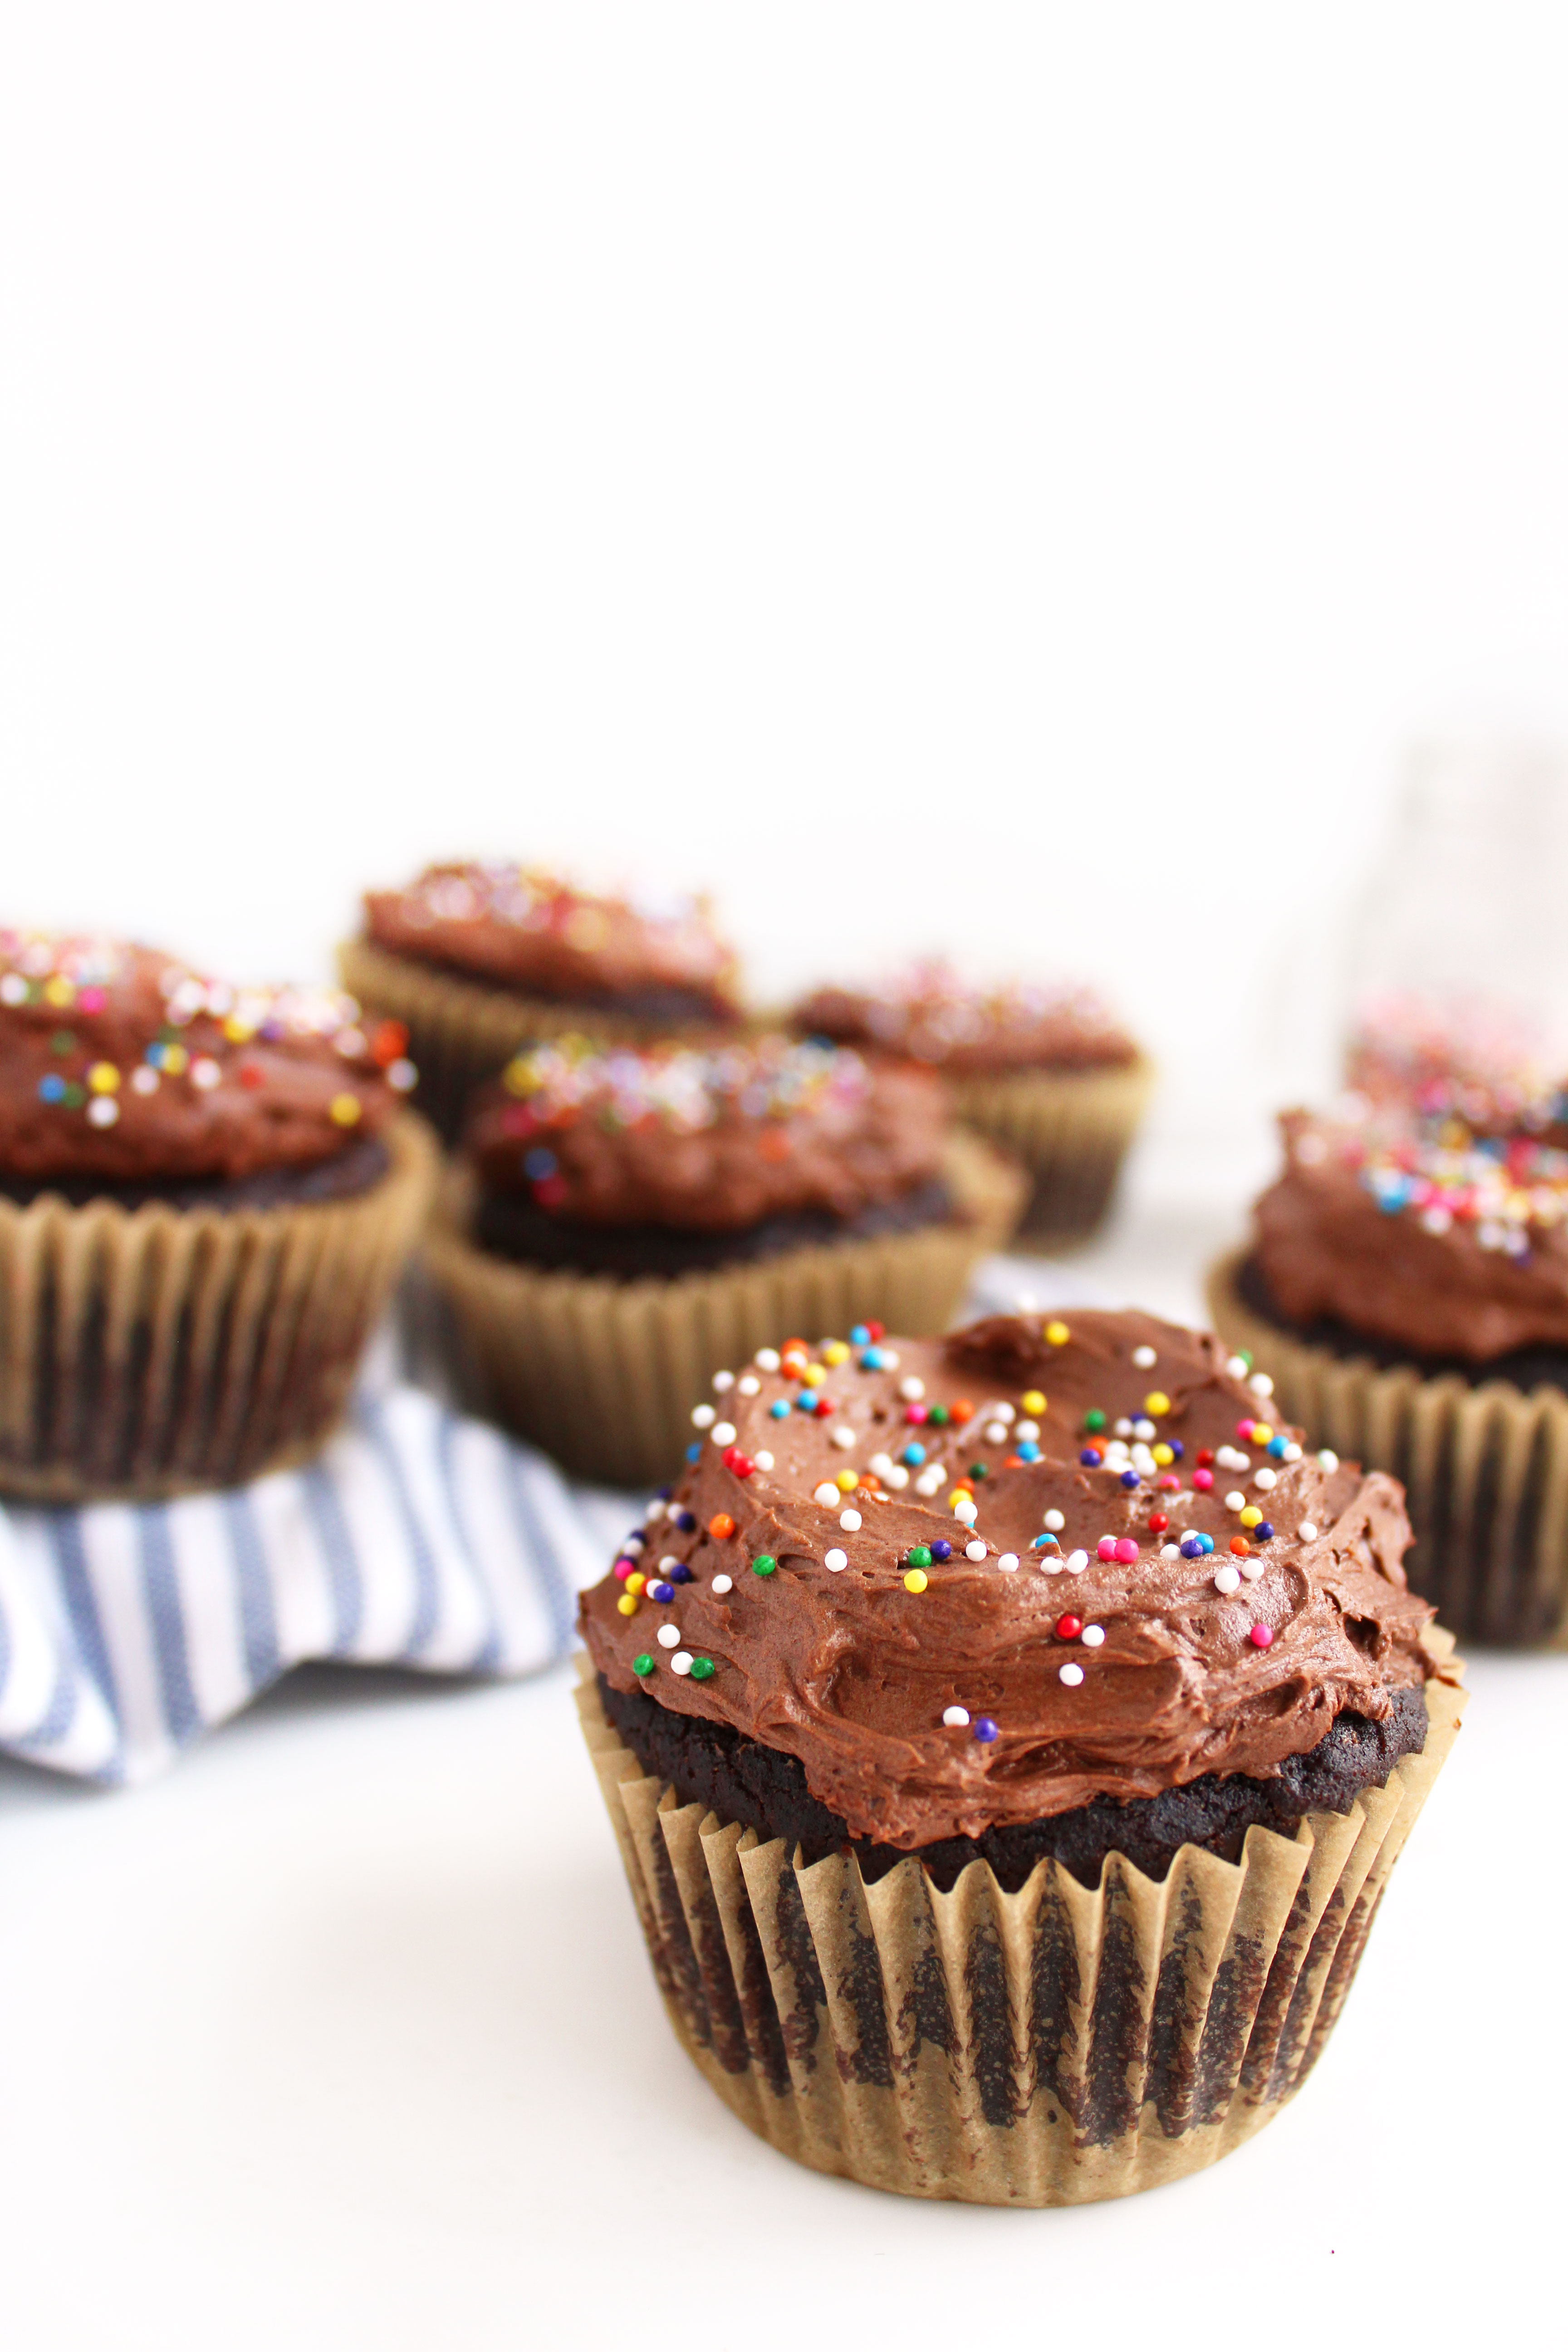 Vegan Chocolate Cupcakes (GF)! A cupcake worthy of a celebration - super chocolatey, moist, & topped with a to-die-for fudge frosting! #vegan #glutenfree #cupcakes | Peachandthecobbler.com